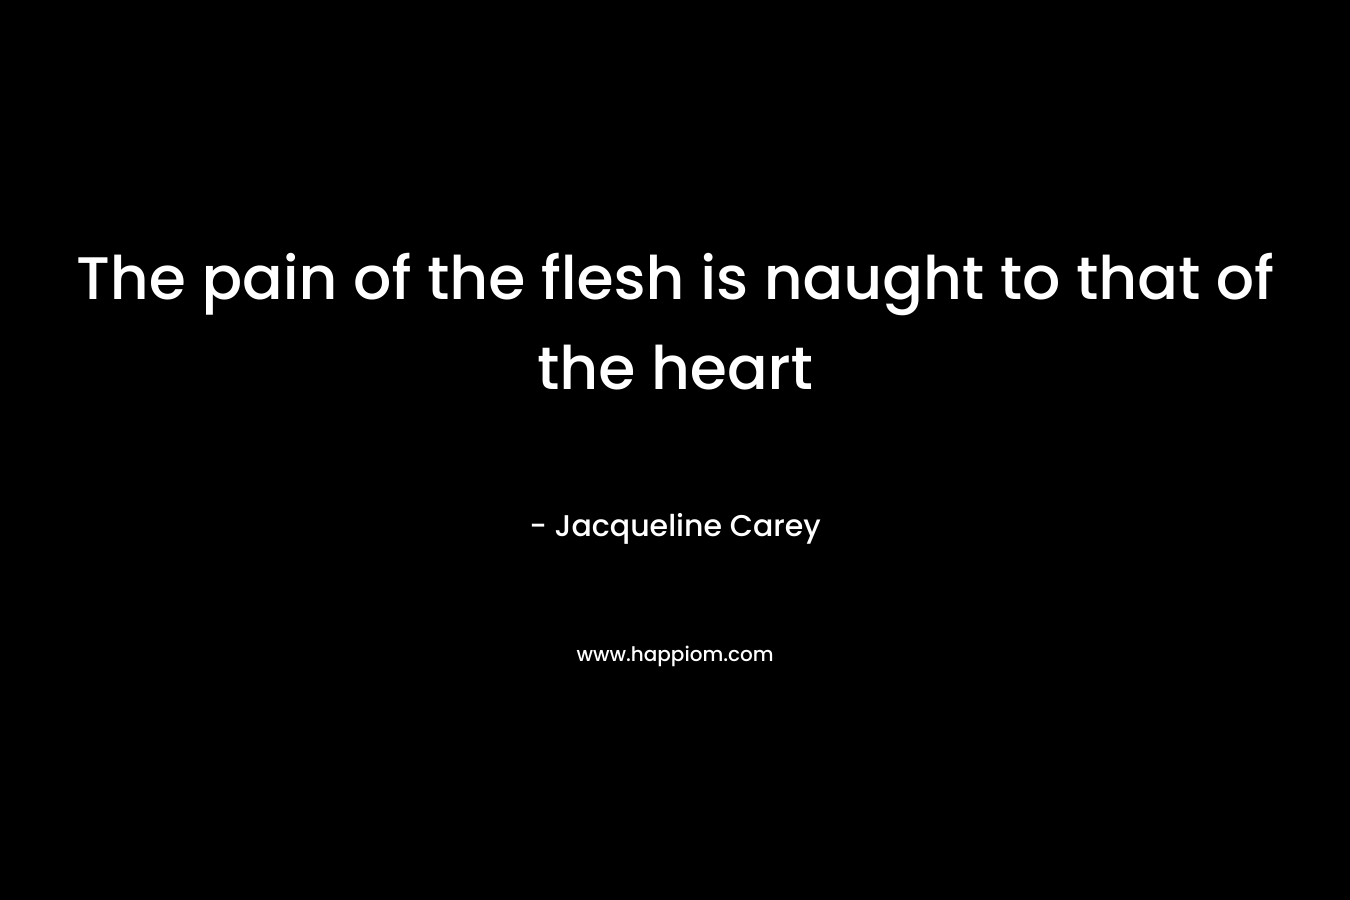 The pain of the flesh is naught to that of the heart – Jacqueline Carey